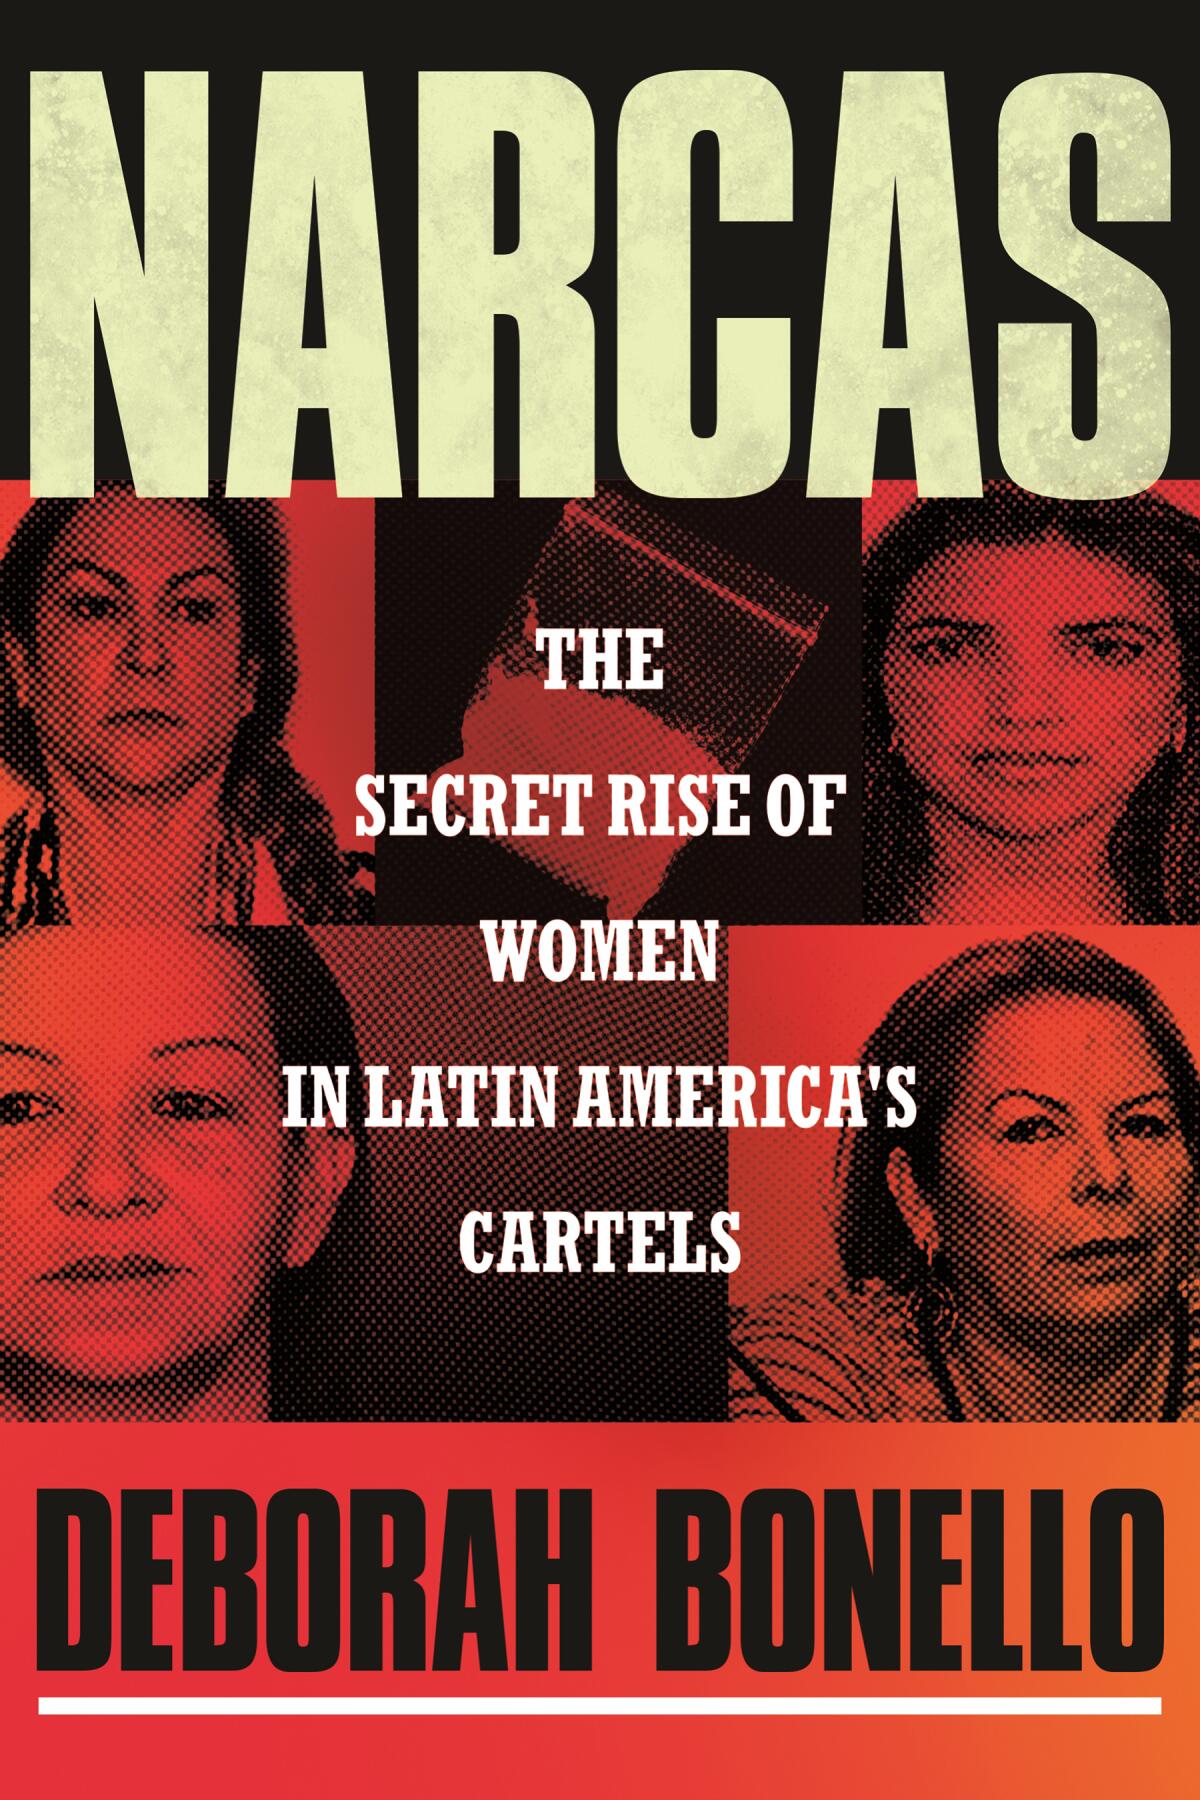 The cover of "Narcas: The Secret Rise of Women In Latin America's Cartels."